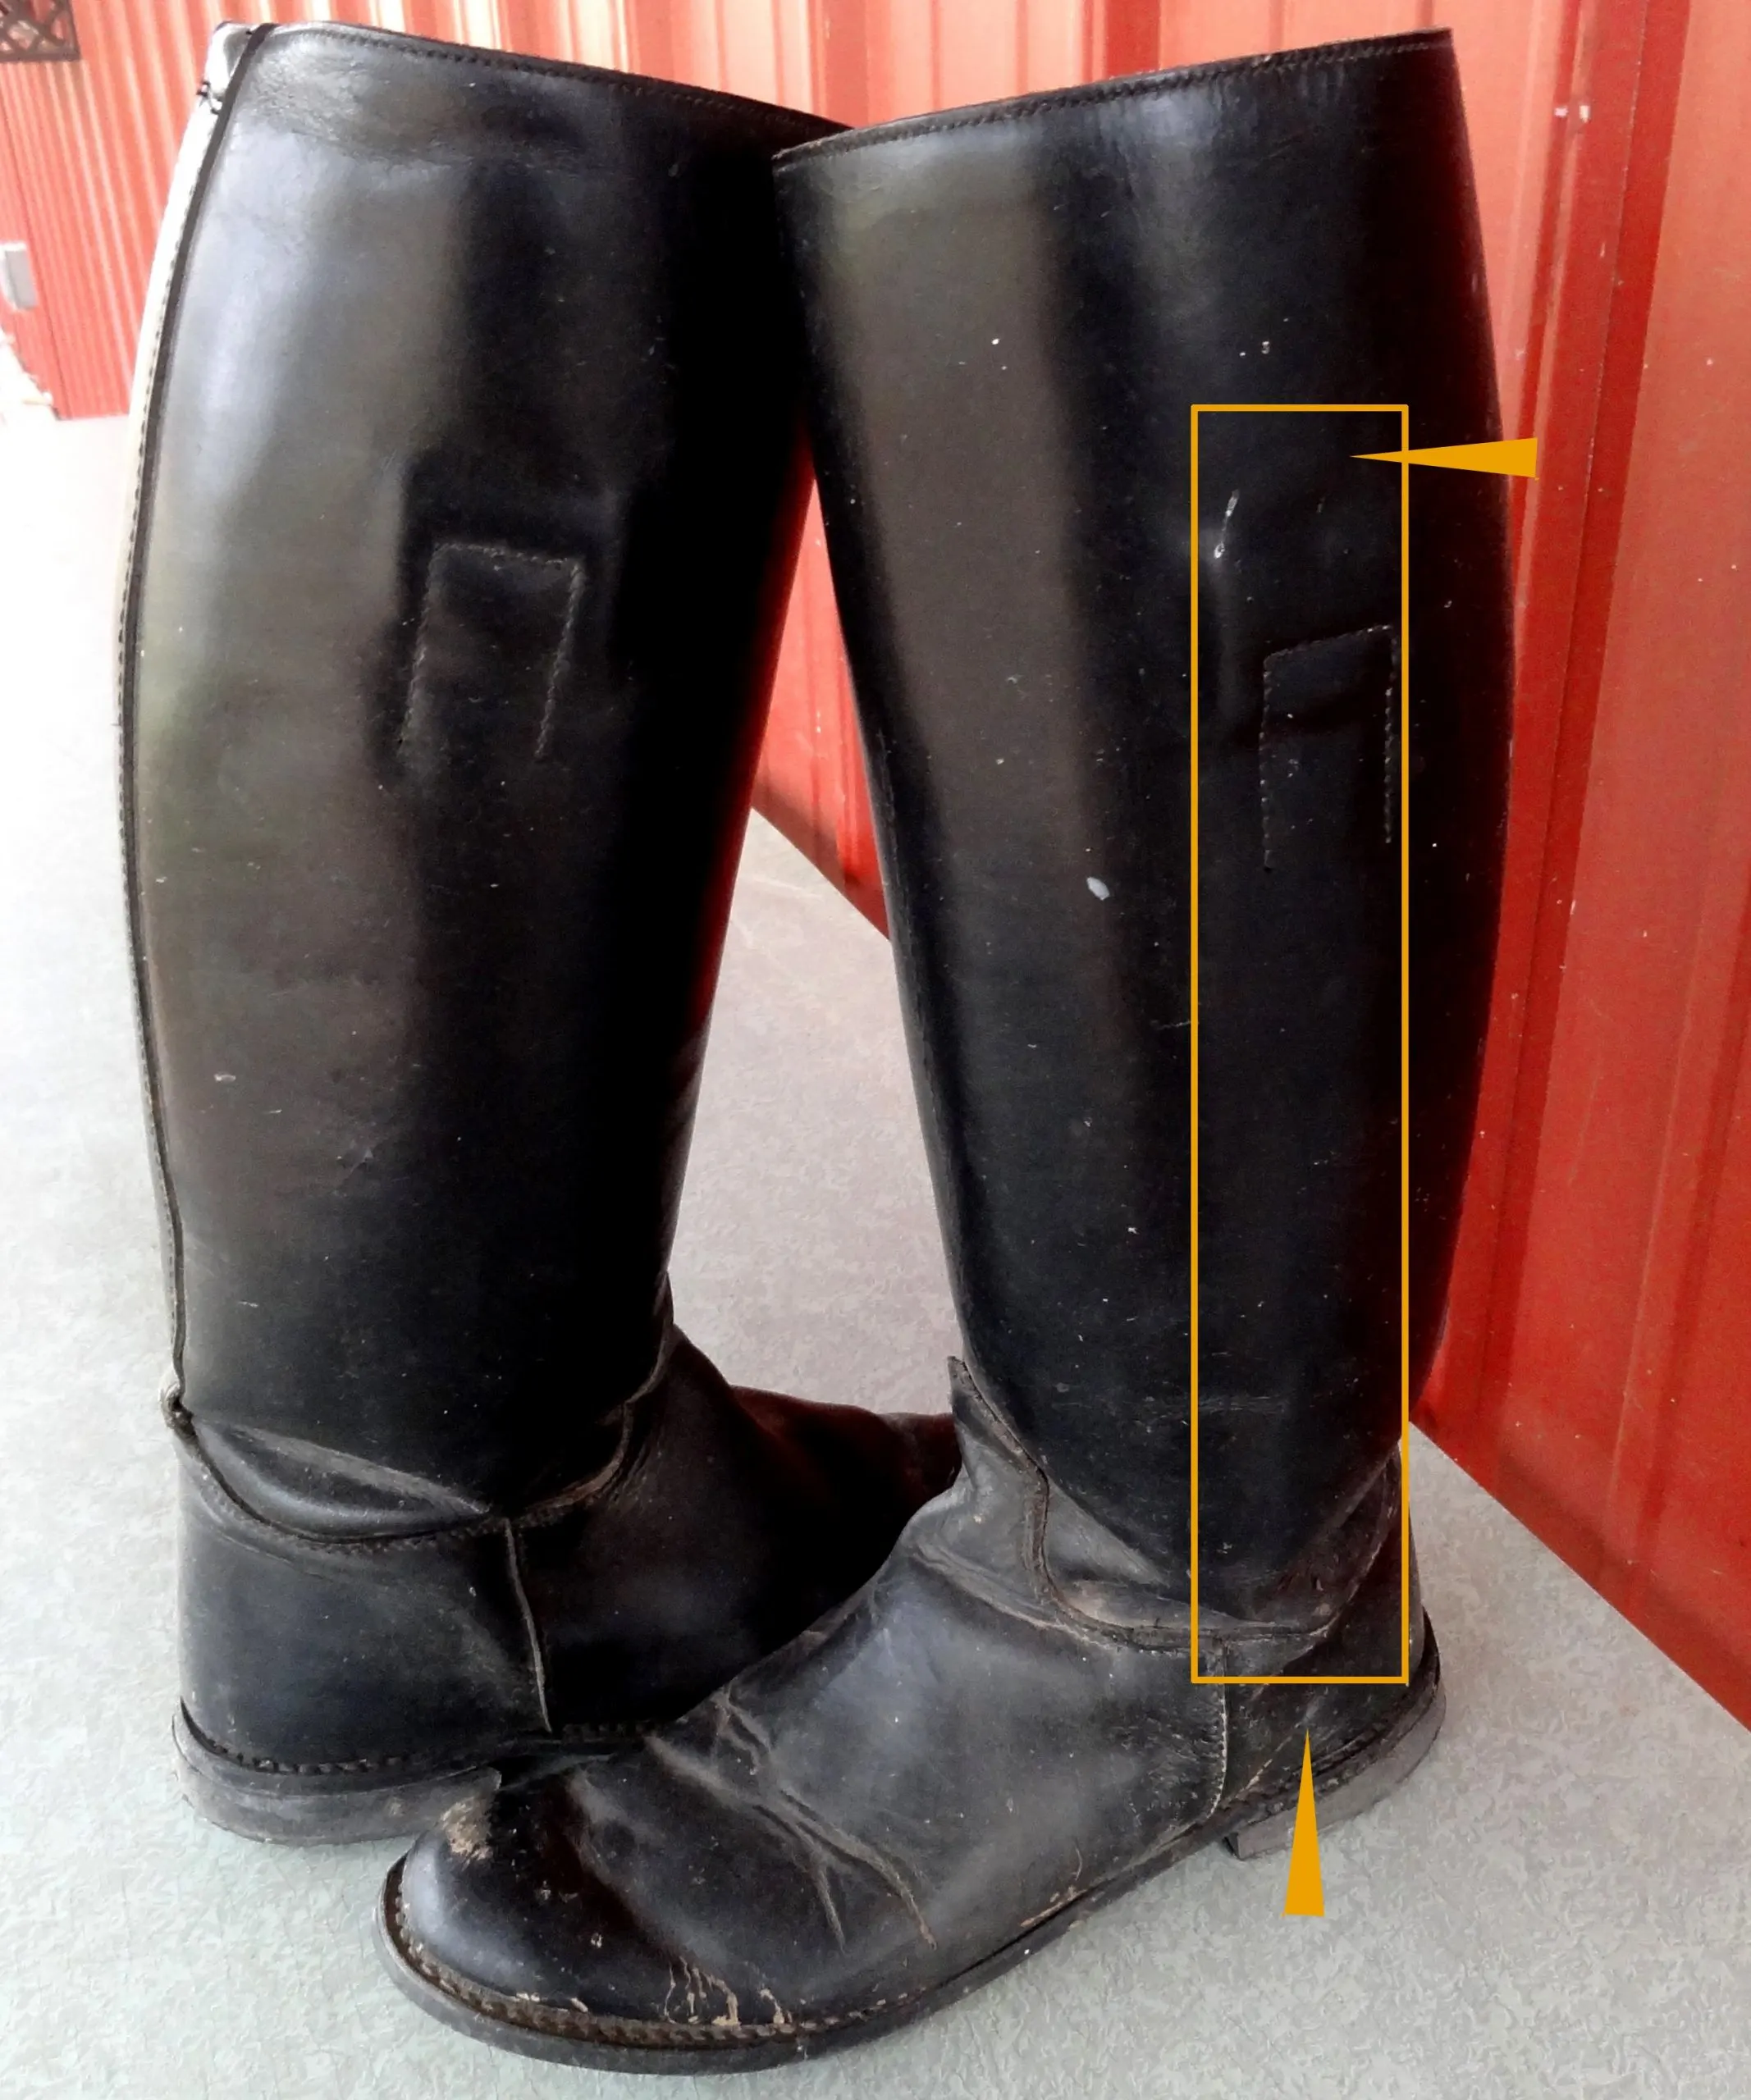 A photo of boots showing where they are braced.